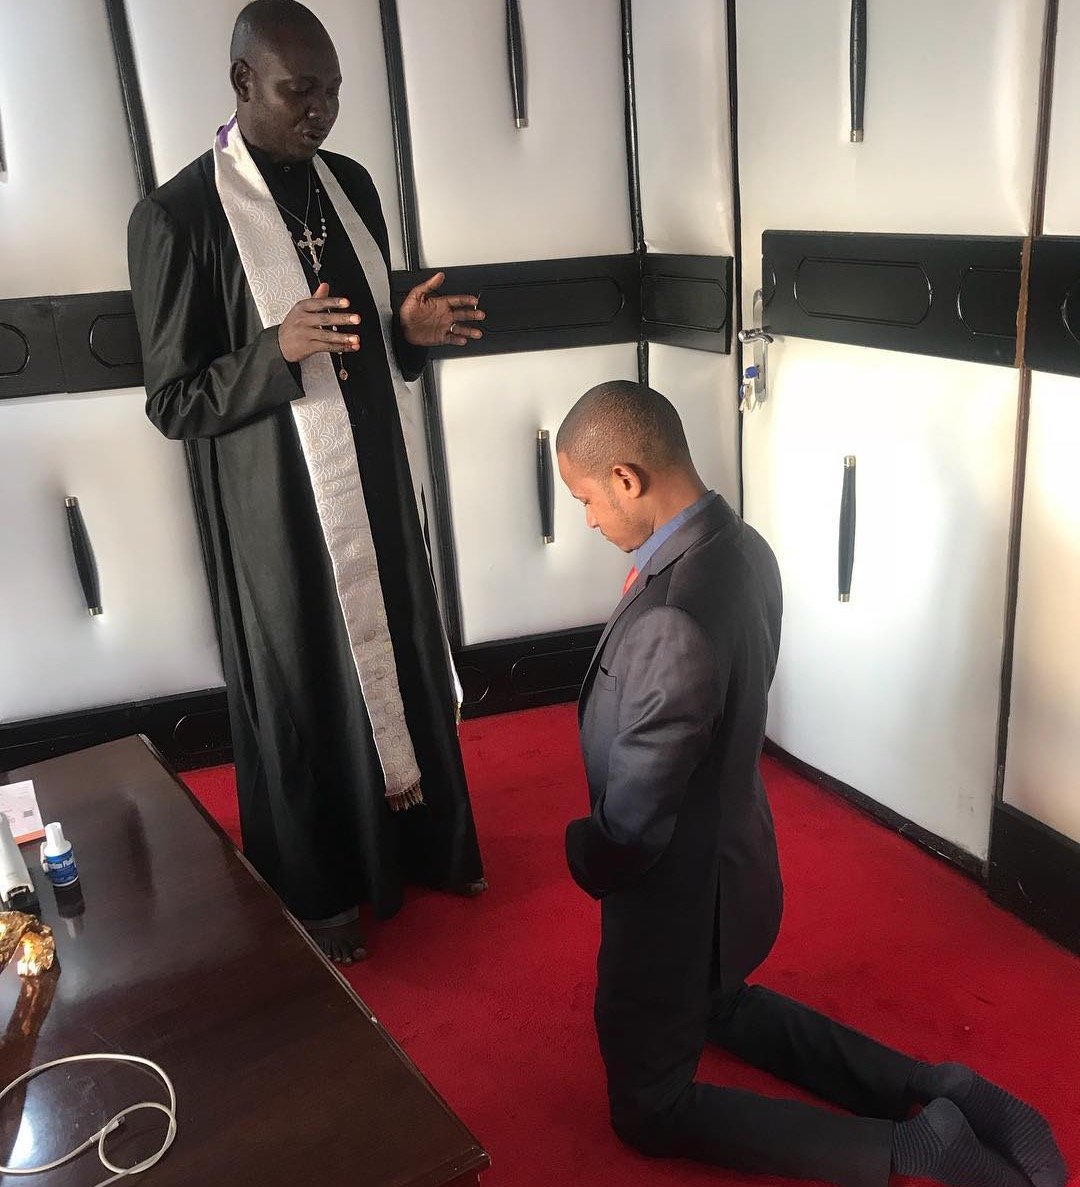 “I have decided to make some changes in my life” reveals Babu Owino